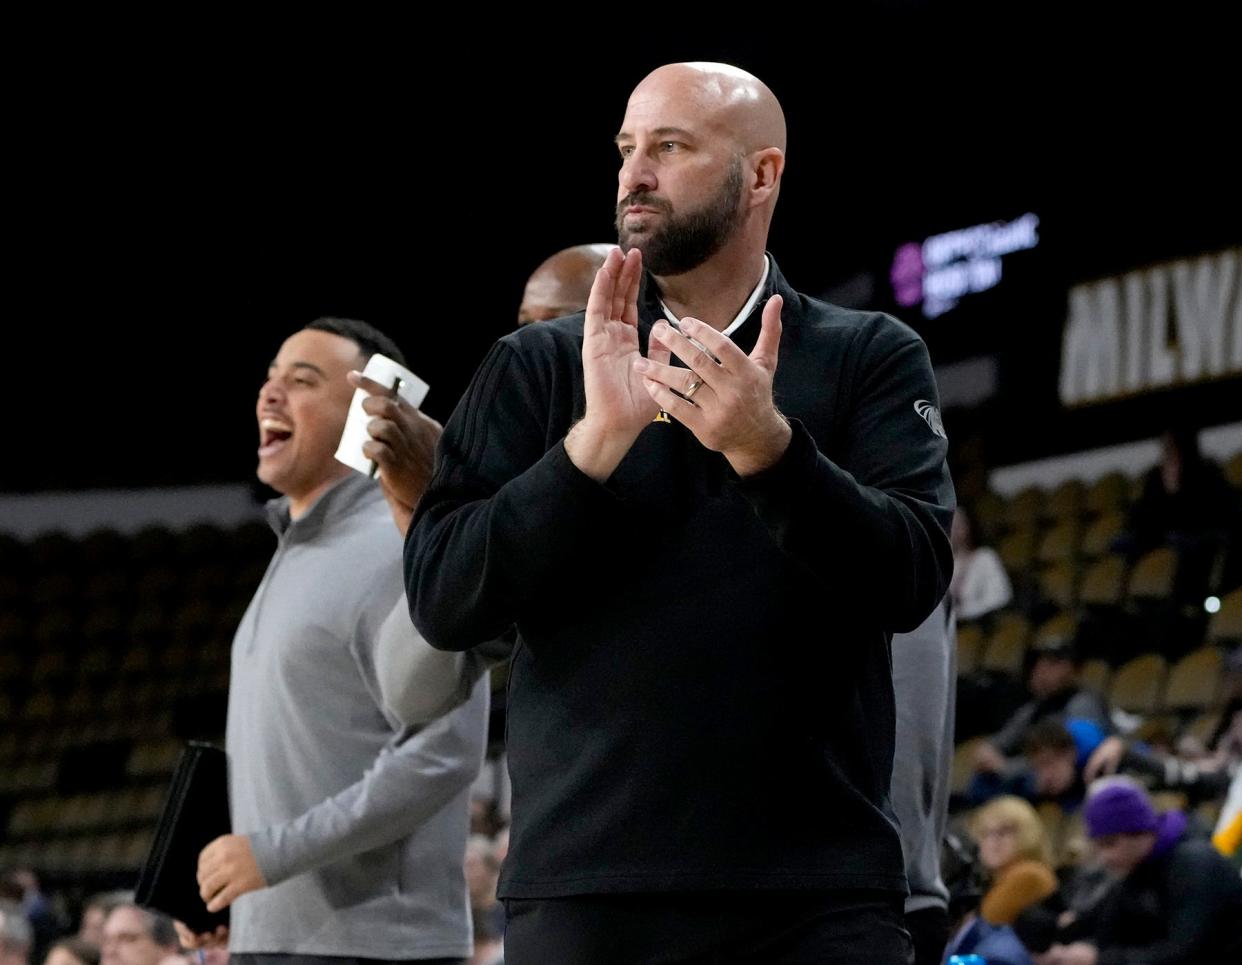 UW-Milwaukee Panthers head coach Bart Lundy applauds a defensive stand during the second half of the Panthers 92-63 win against the North Park Vikings at the UWM Panther Arena in Milwaukee on Sunday, Dec. 11, 2022.